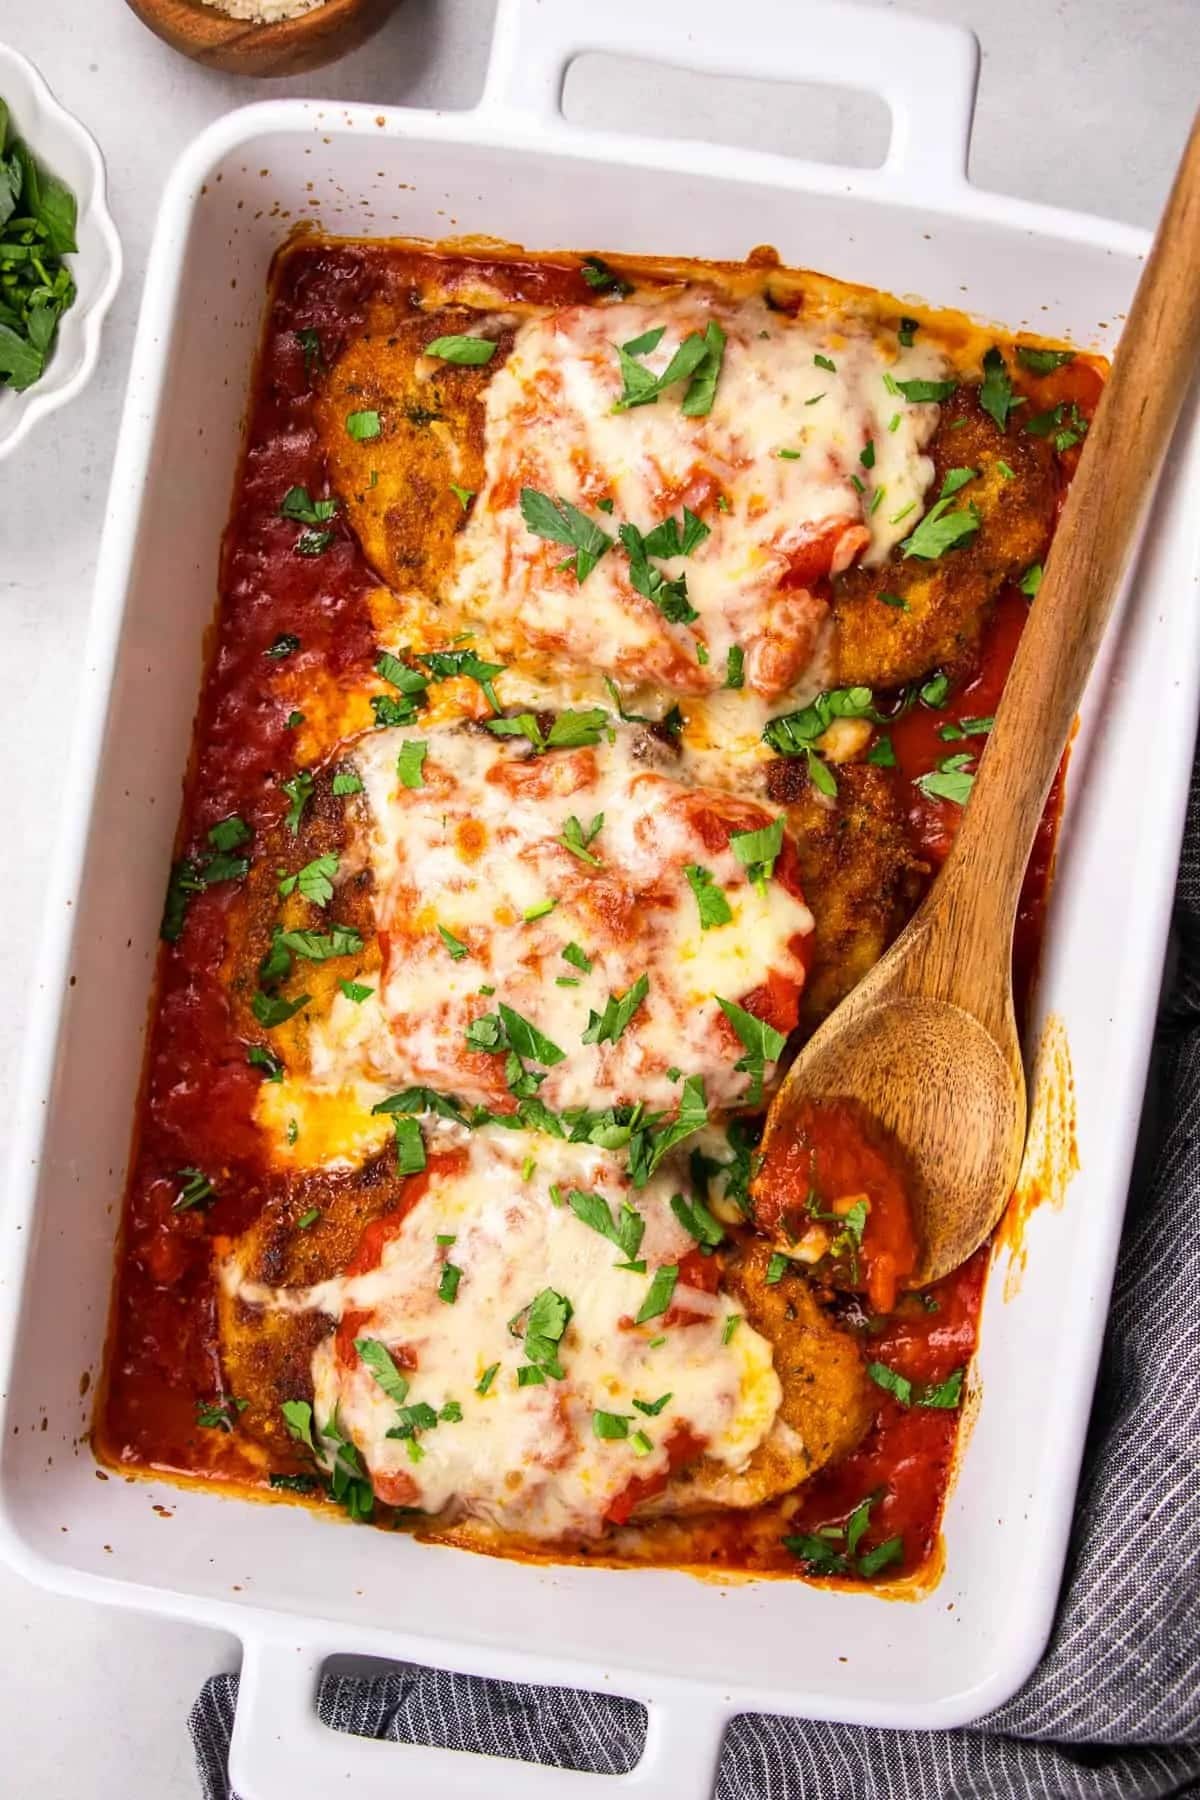 Classic Chicken Parmesan with Parsley in a White Casserole